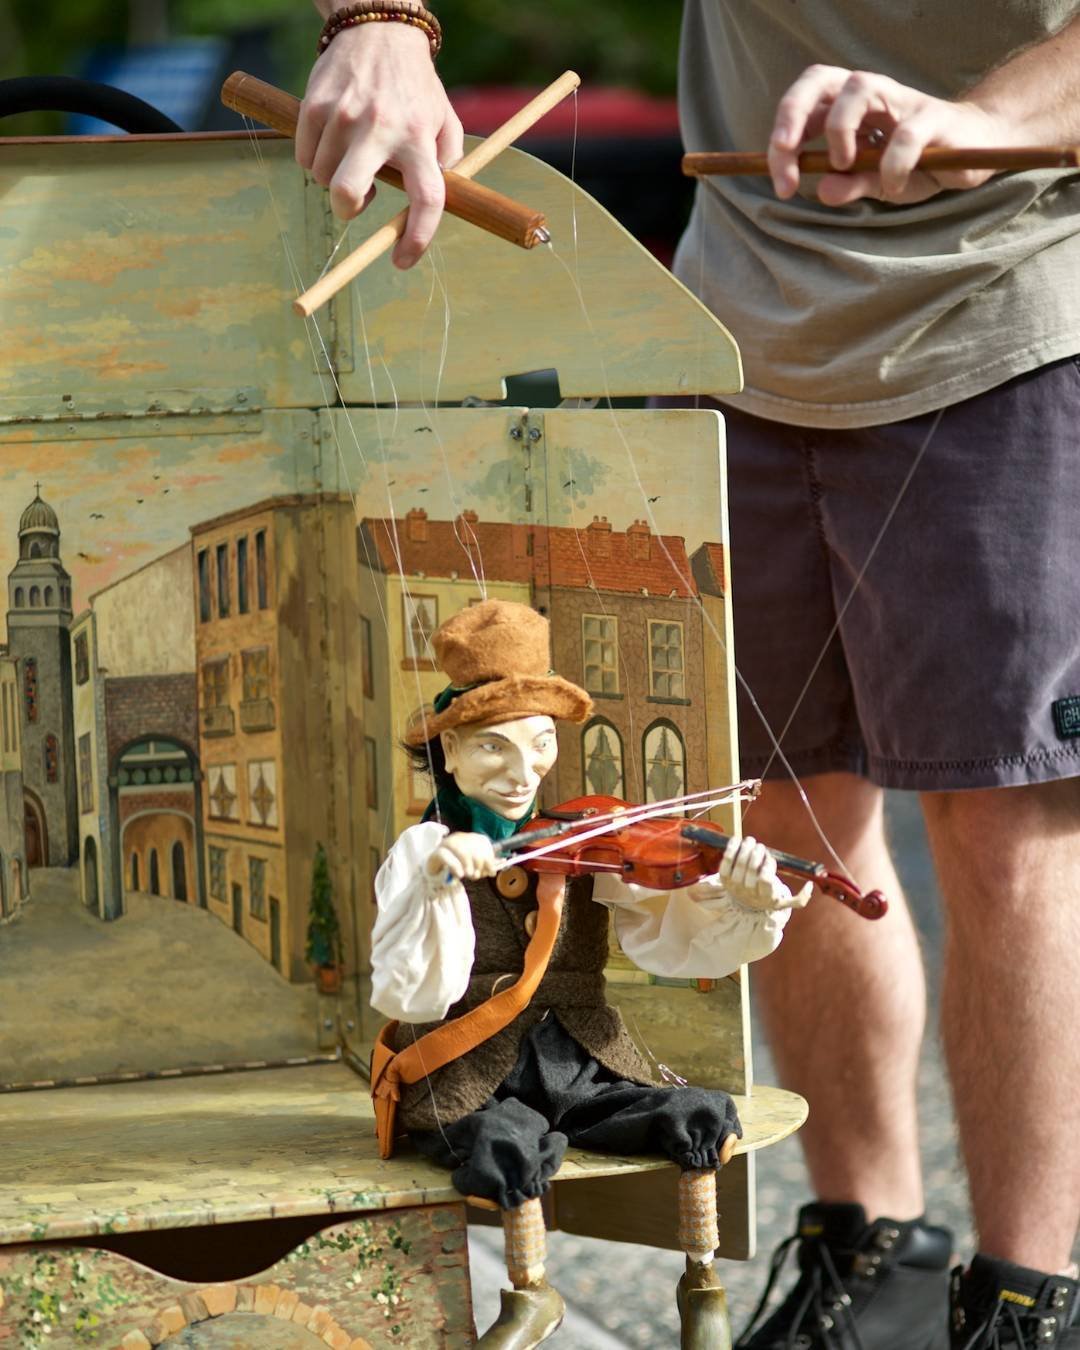 It's a double market day today at Powerhouse and Manly and that certainly is music to our ears! If you're at Powerhouse, say hi to the lovely marionette puppeteer Scott who will be stopping by 🎻